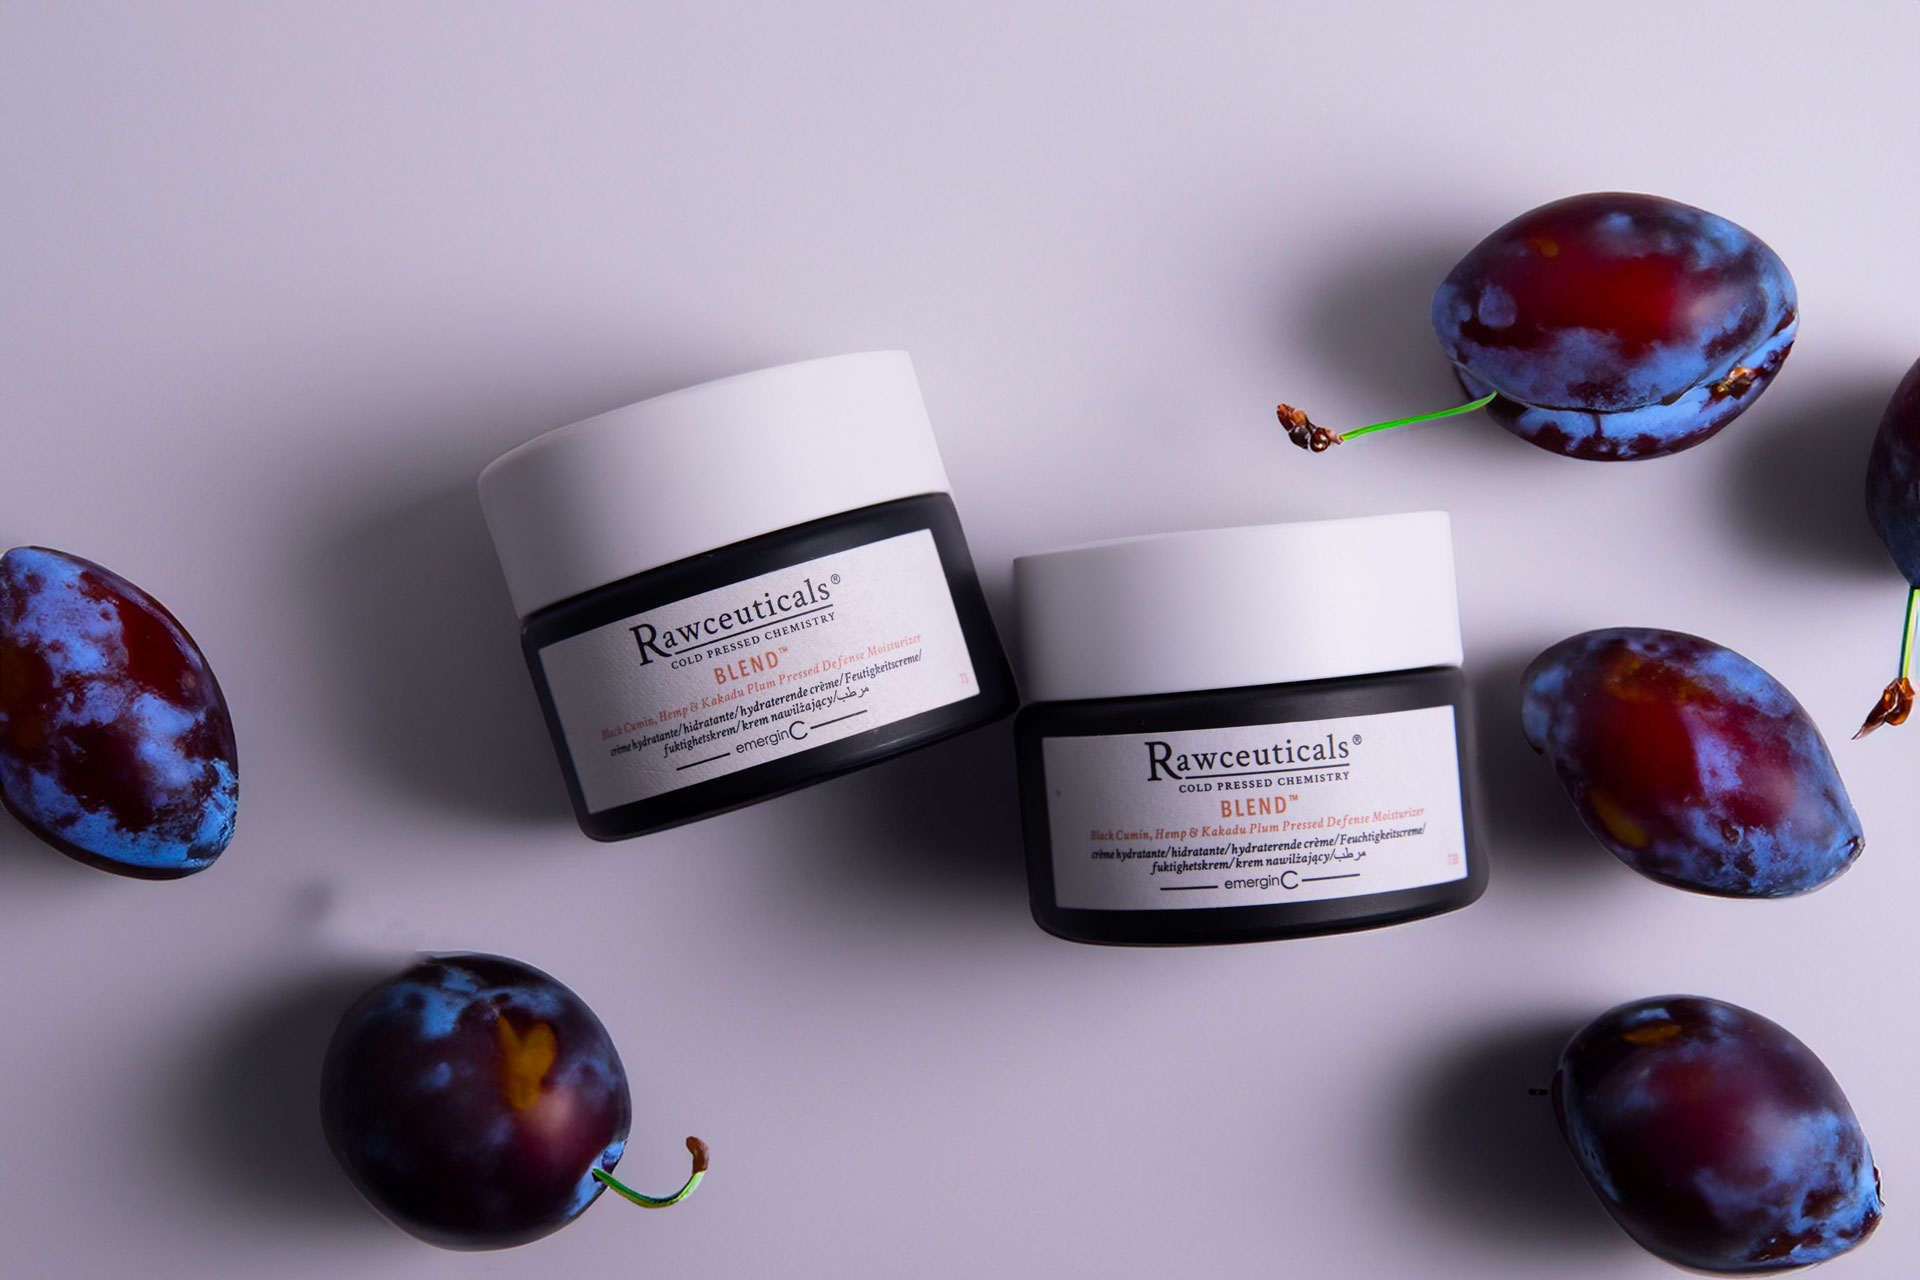 Two jars of rawceuticals skincare products surrounded by fresh plums on a light grey background.